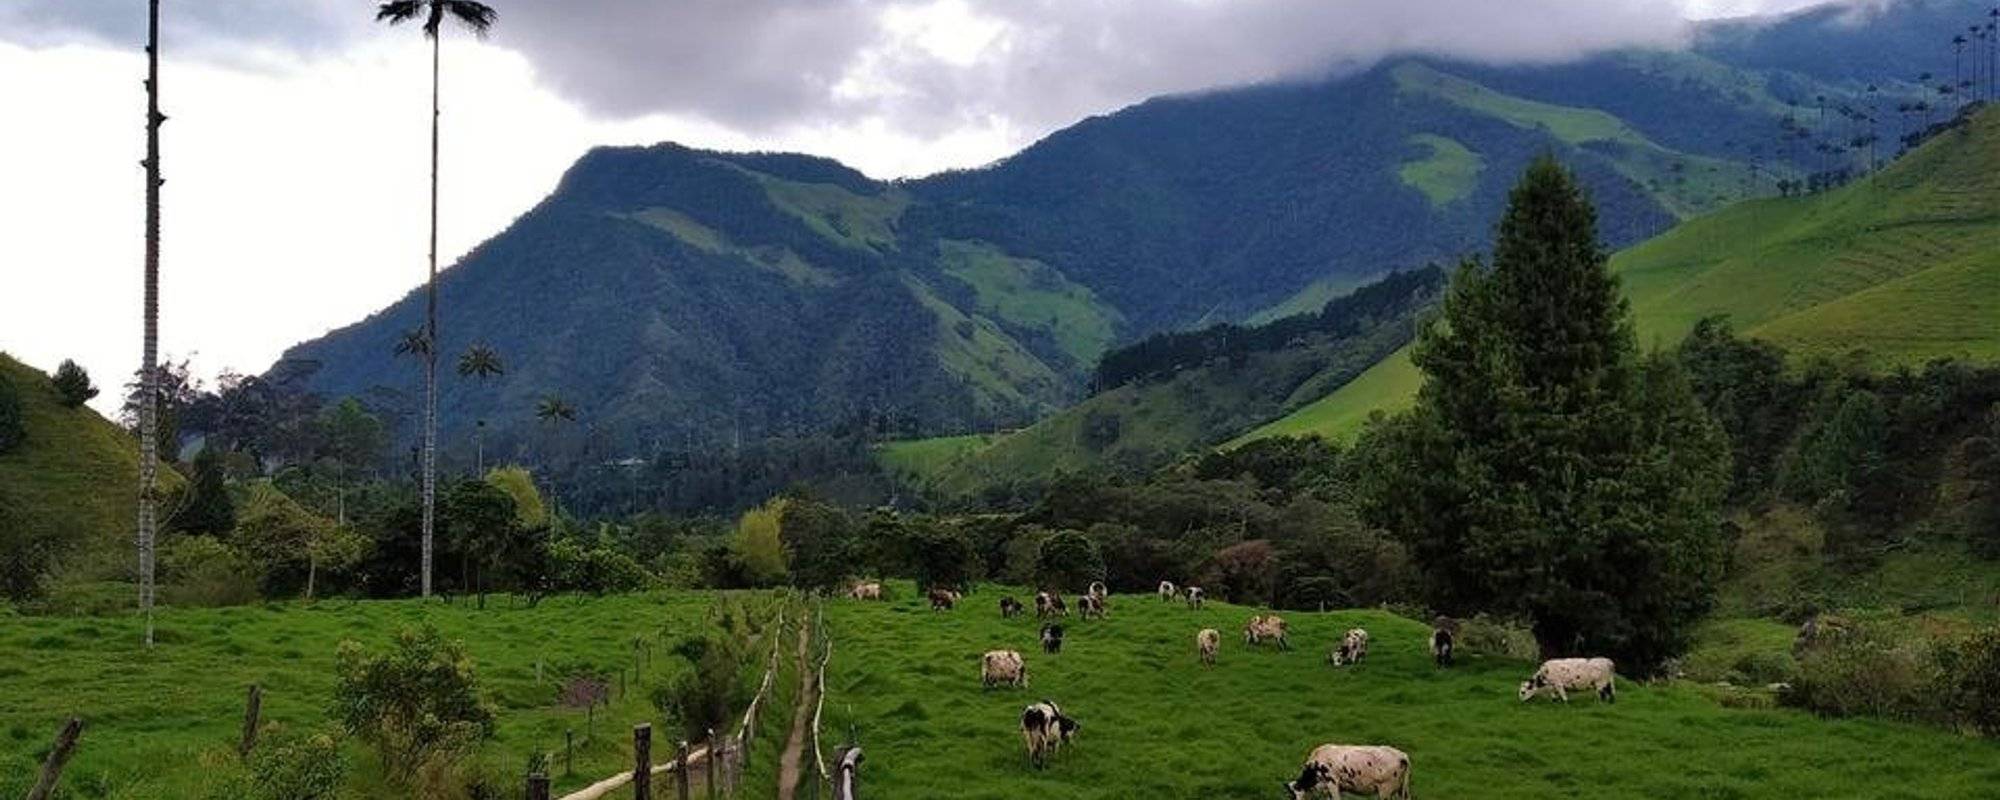 Beauties of Colombia: mesmerizing Cocora Valley - part 2